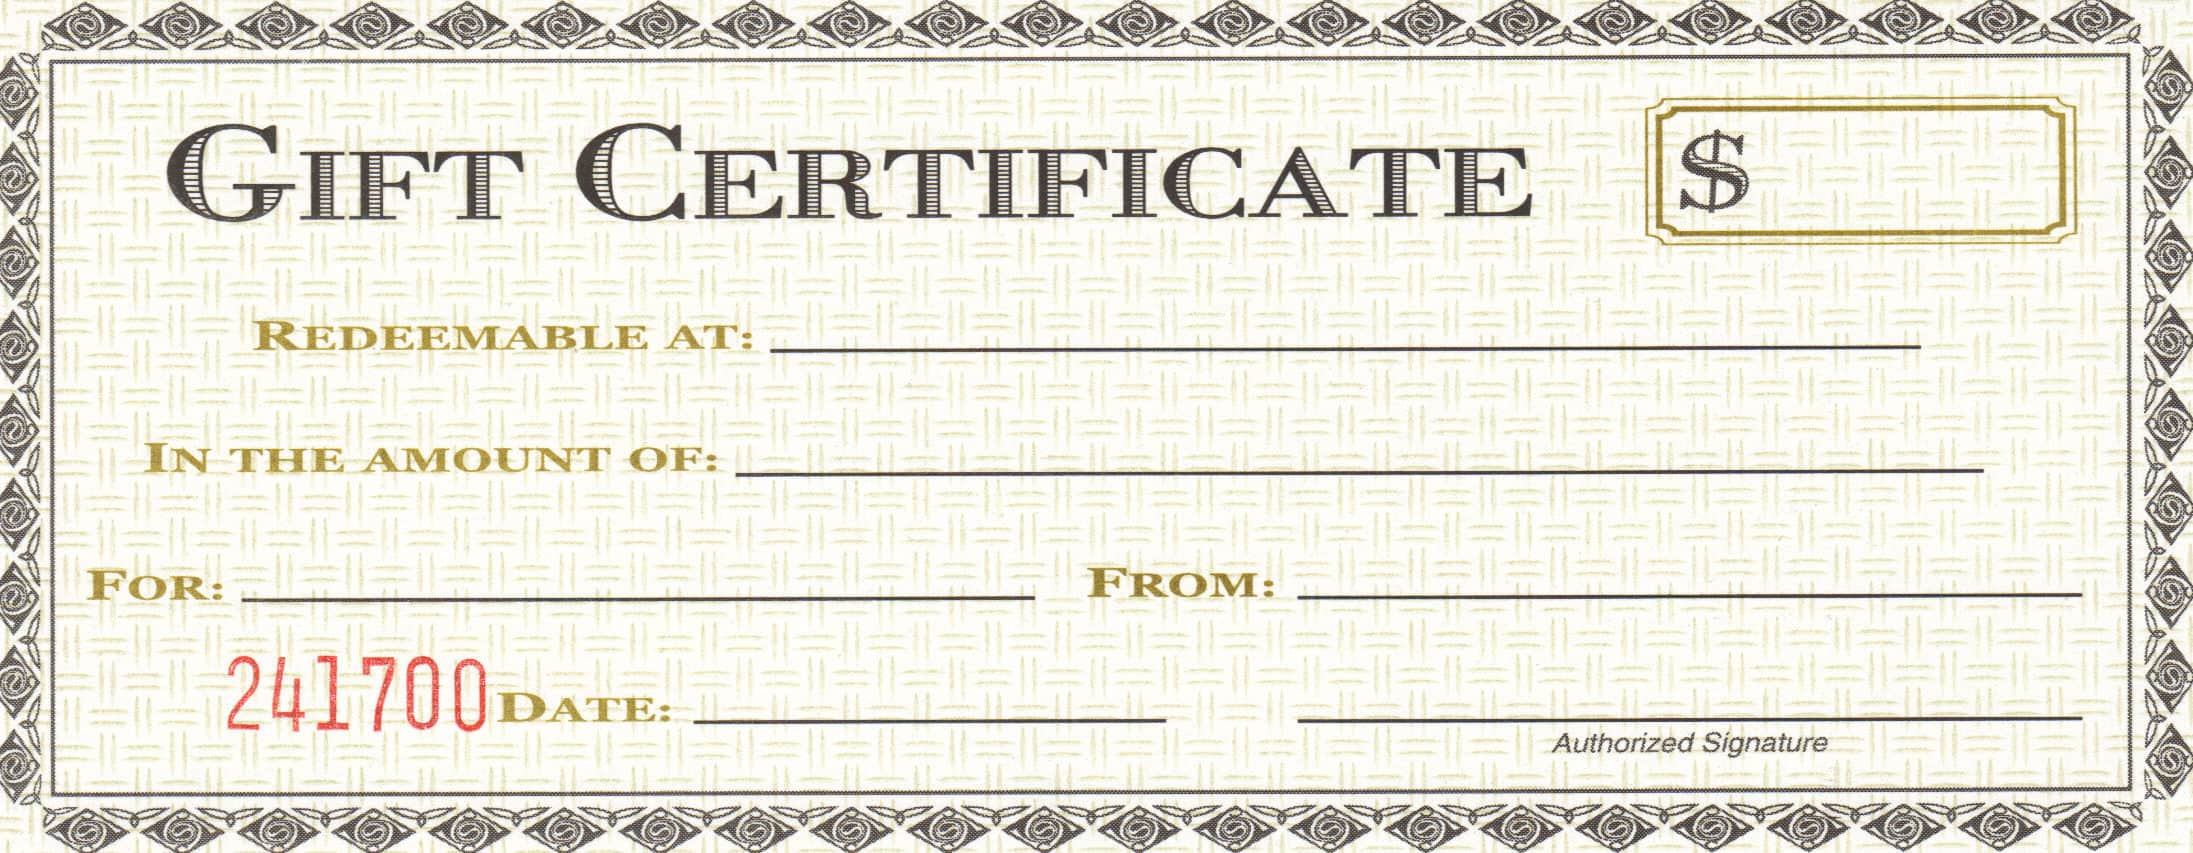 word templates gift certificates free